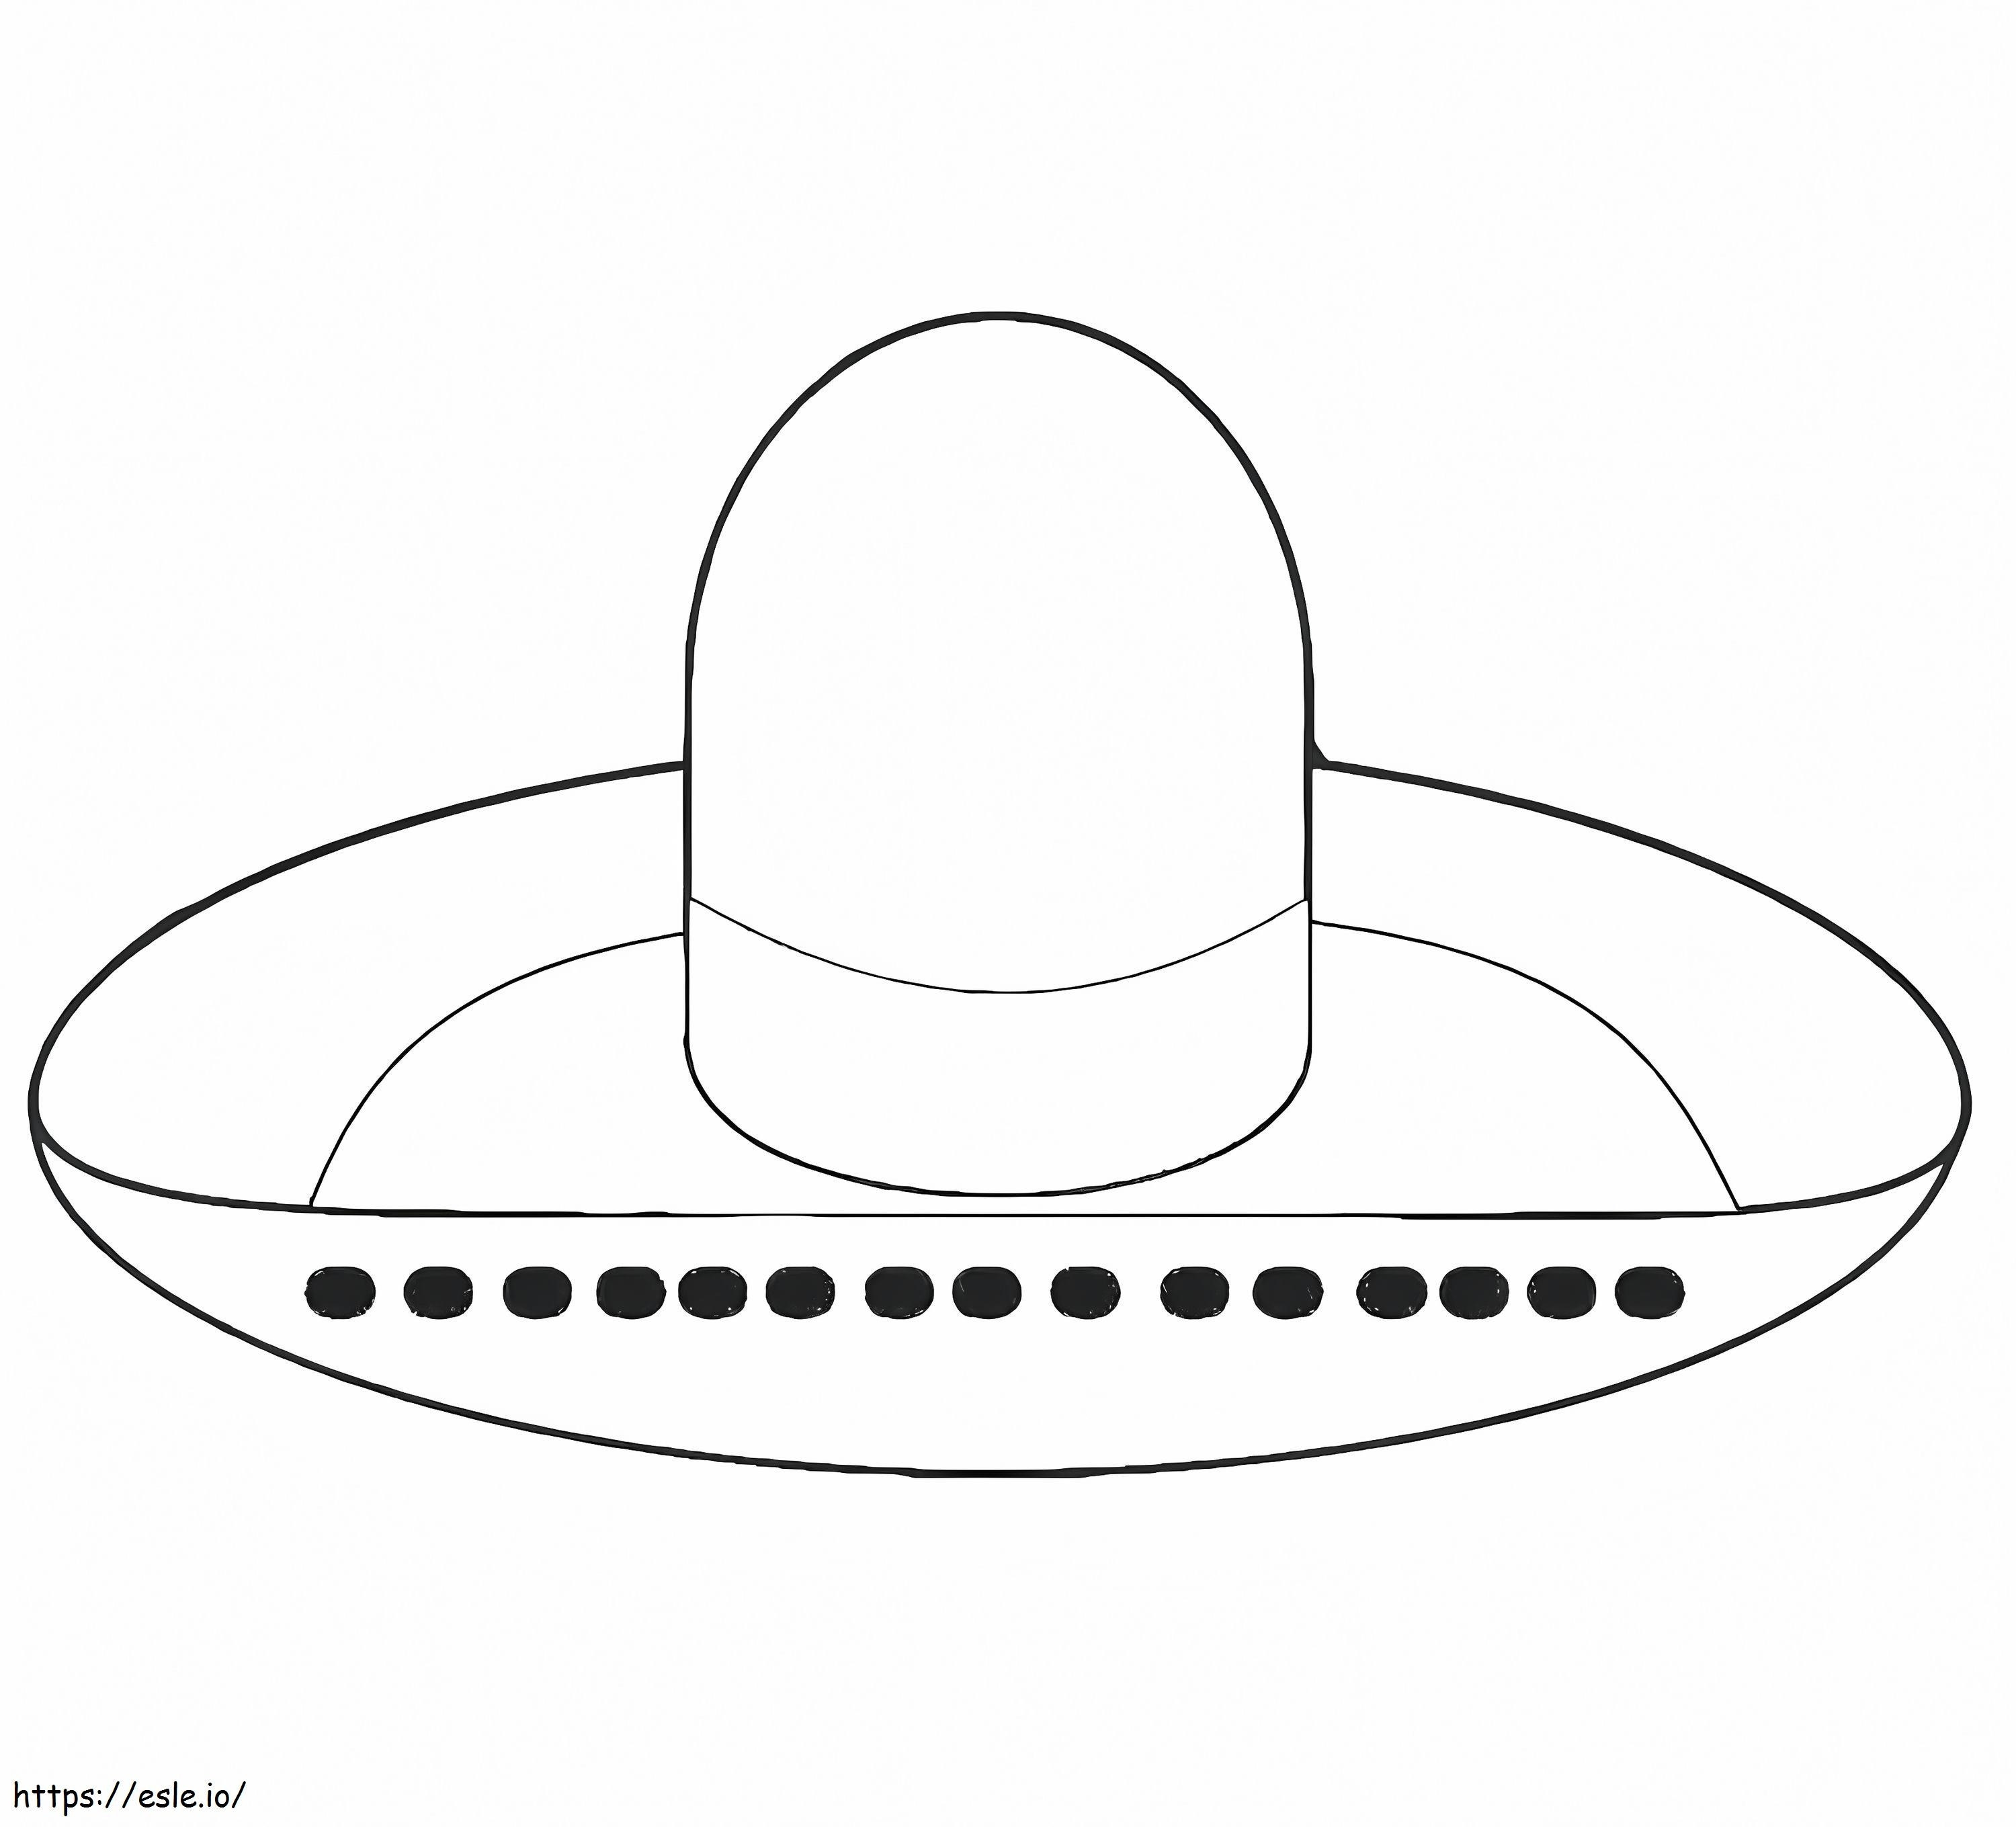 Regular Hat coloring page